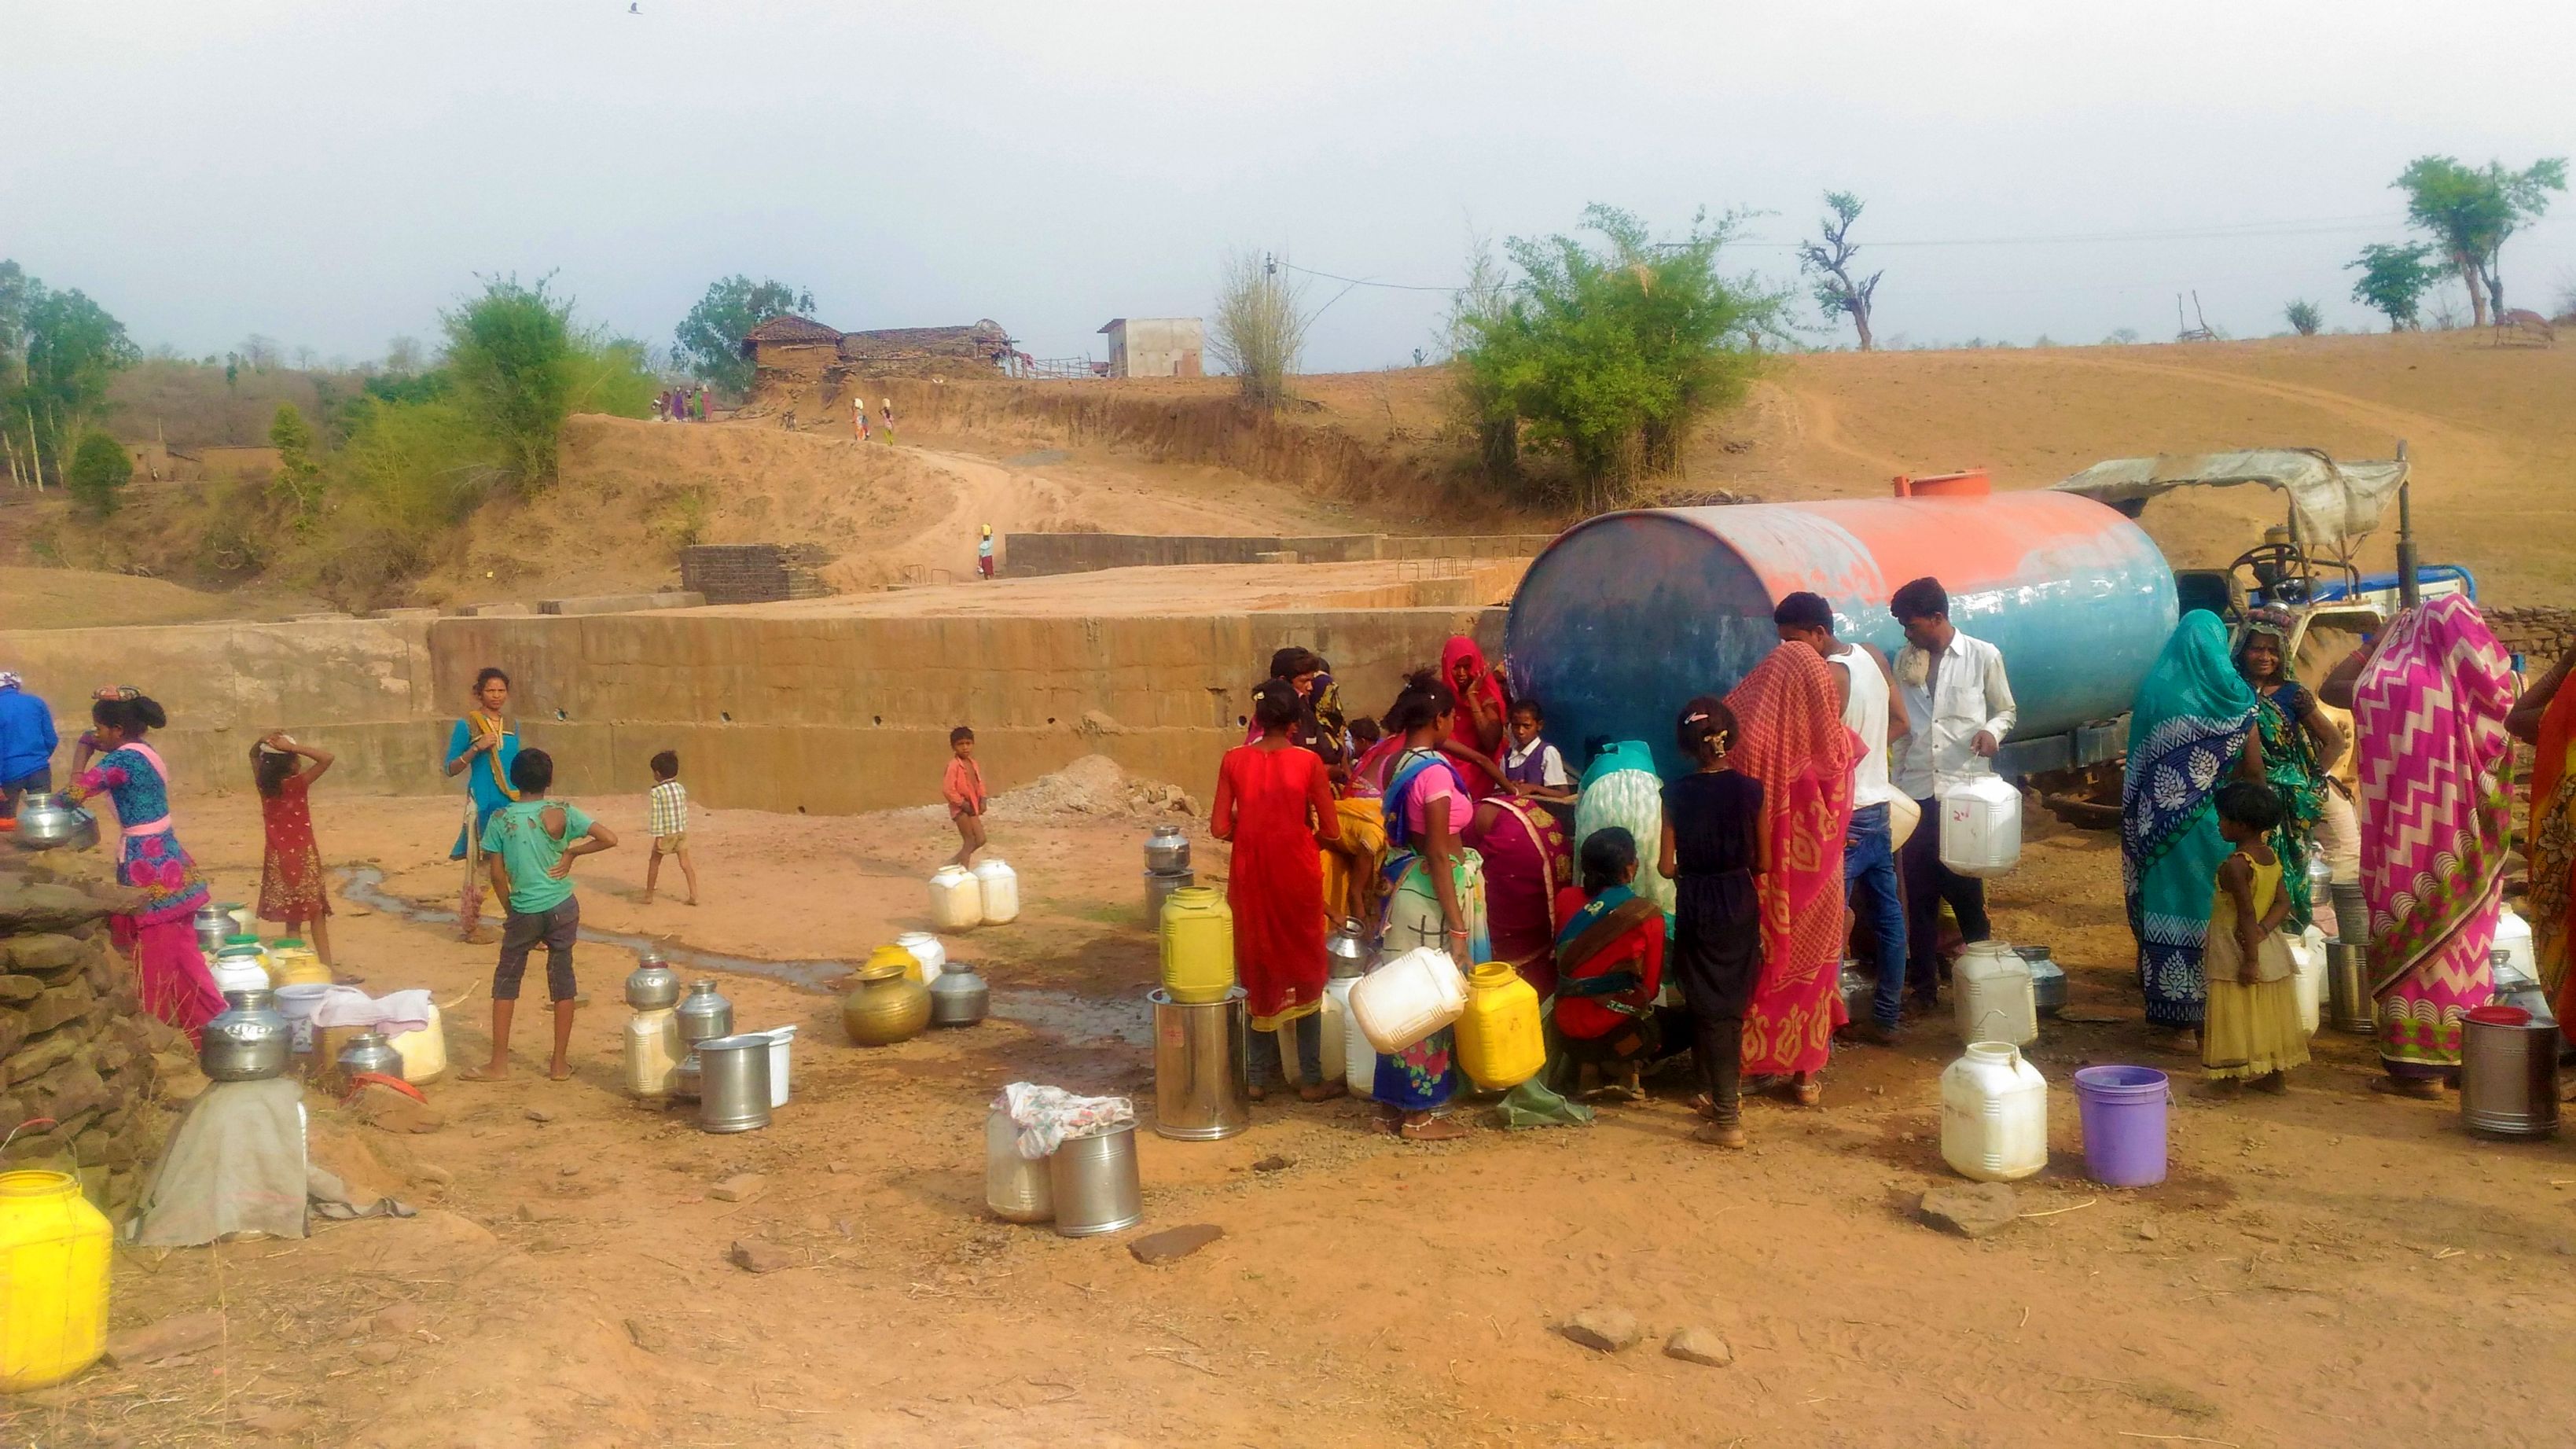 Intermittent supply of tanker in Kathayi, provided for the first time in June 2019 (Image: Seema Ravandale)